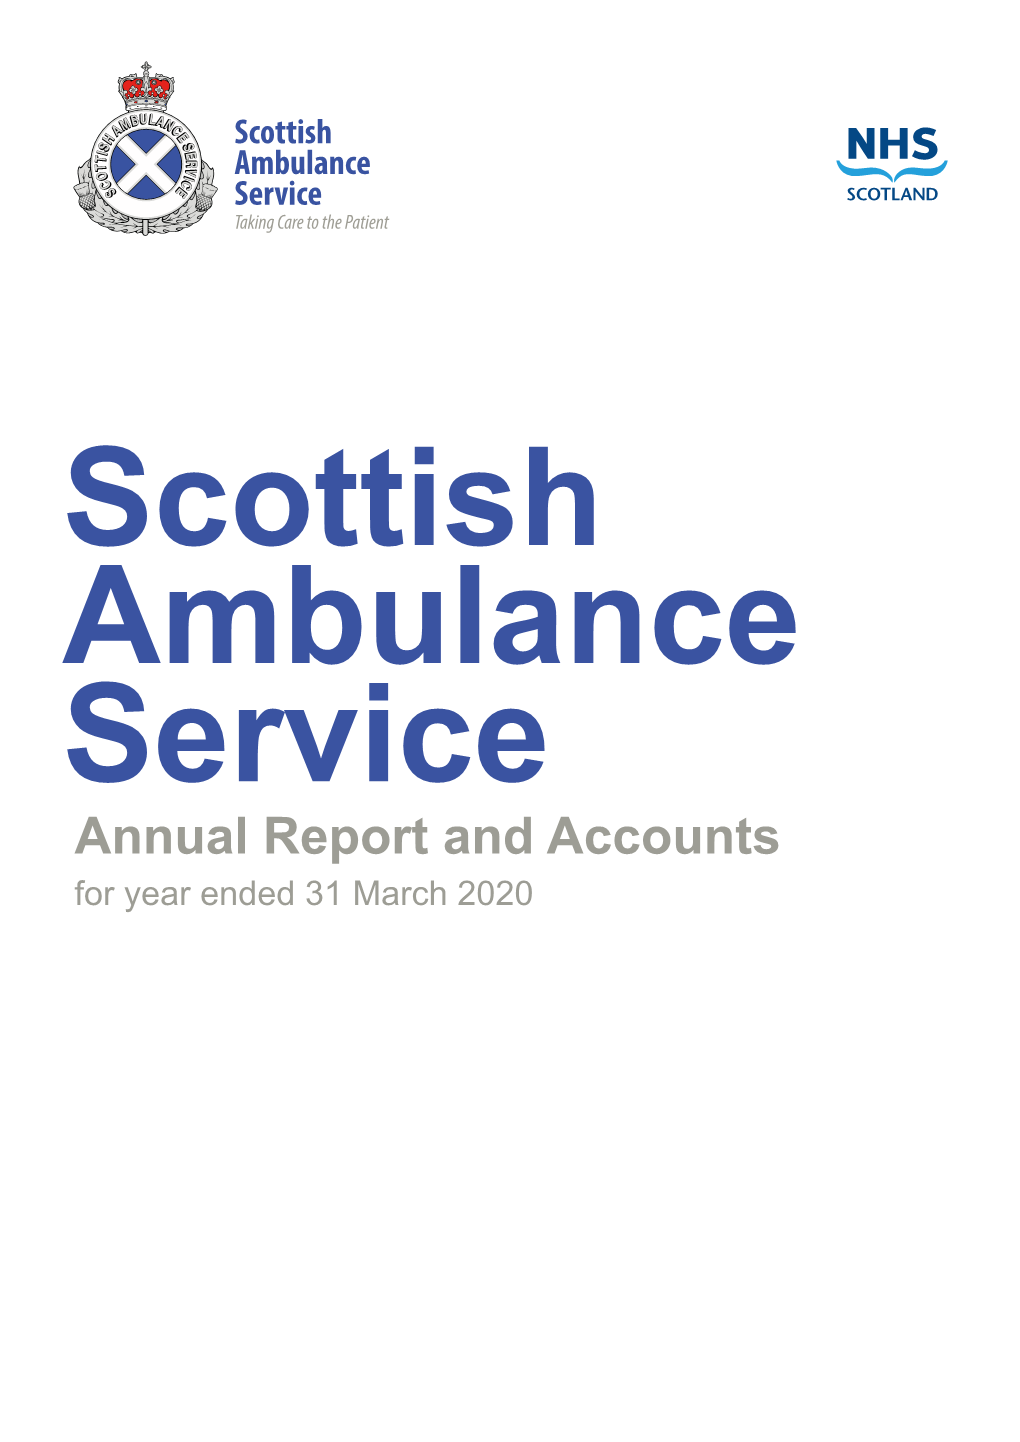 Annual Report and Accounts 2019/20